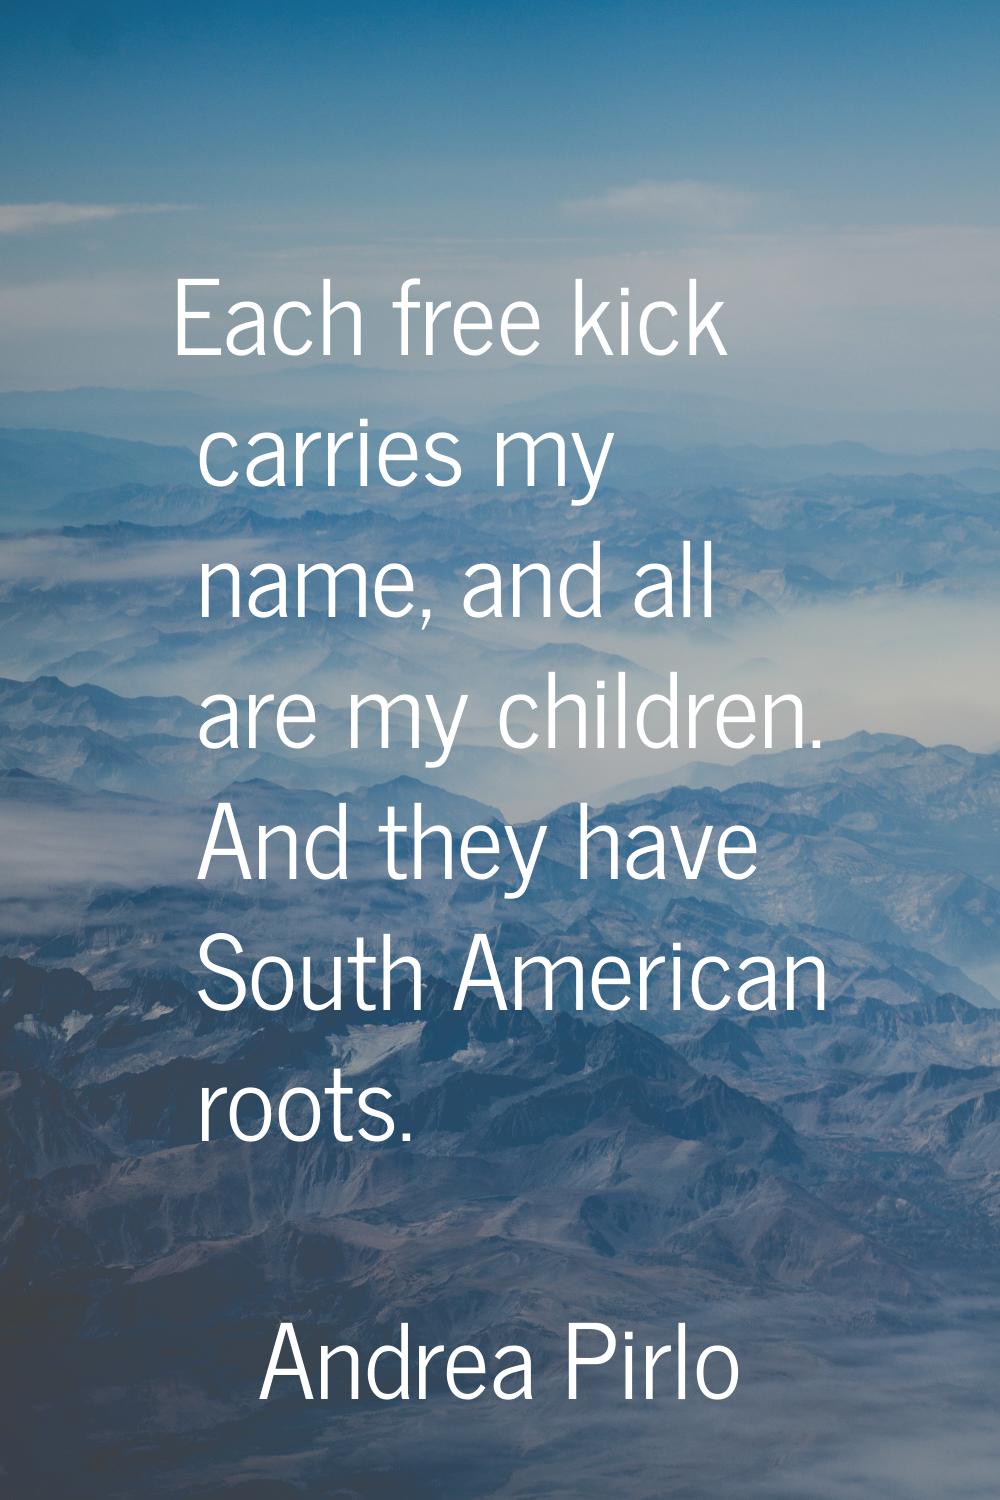 Each free kick carries my name, and all are my children. And they have South American roots.